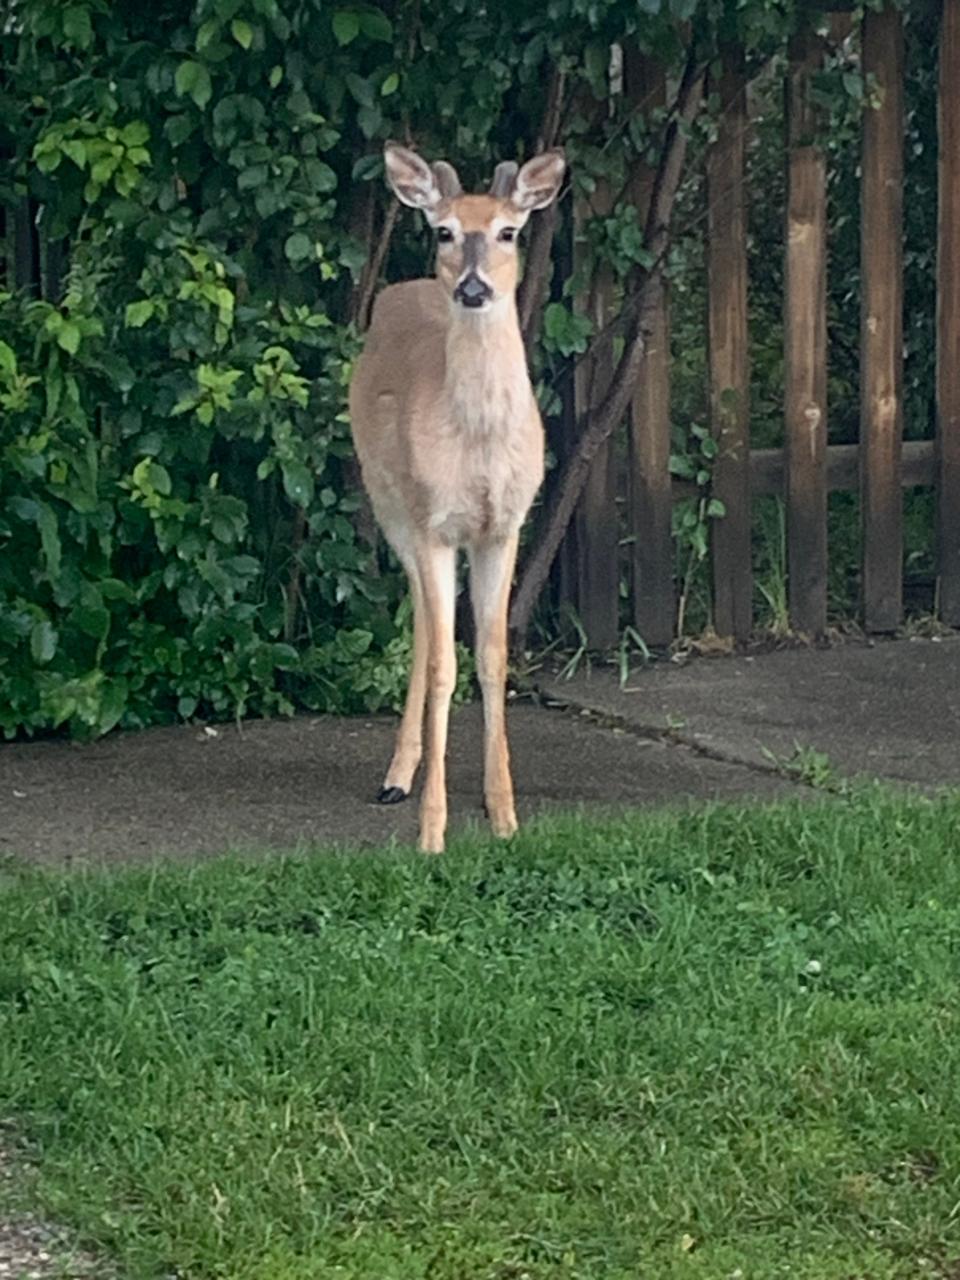 You're as likely to find a deer as a person trimming the lawn of the former miners' house in Red Lodge, Montana, where columnist Carrie Seidman is on a writing retreat.